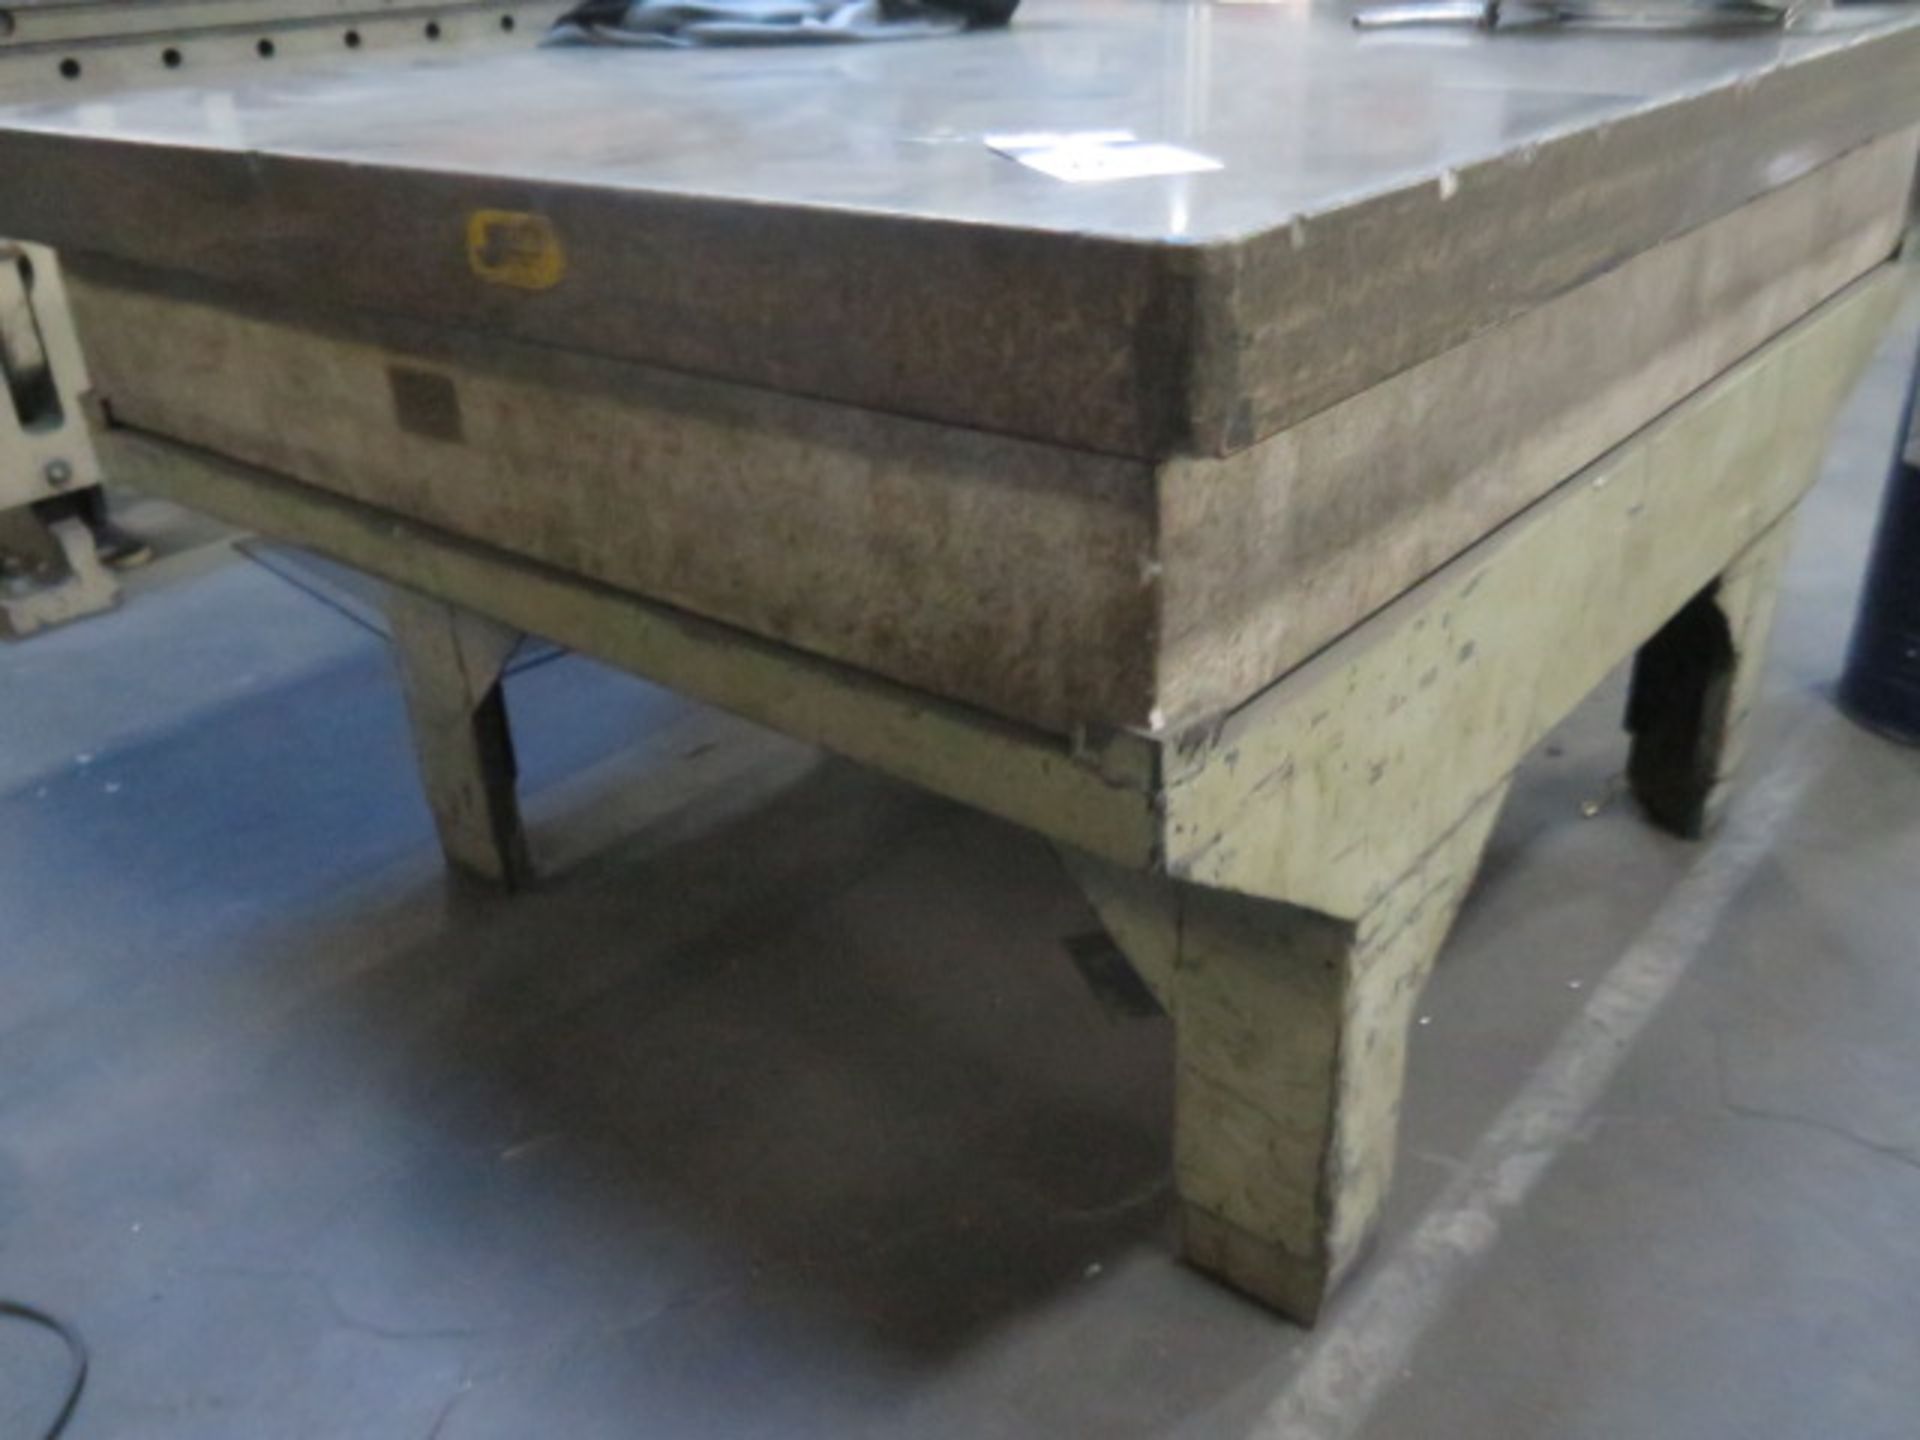 48" x 60" x 10" 4-Ledge Granite Surface Plate w/ Stand (SOLD AS-IS - NO WARRANTY) - Image 2 of 3